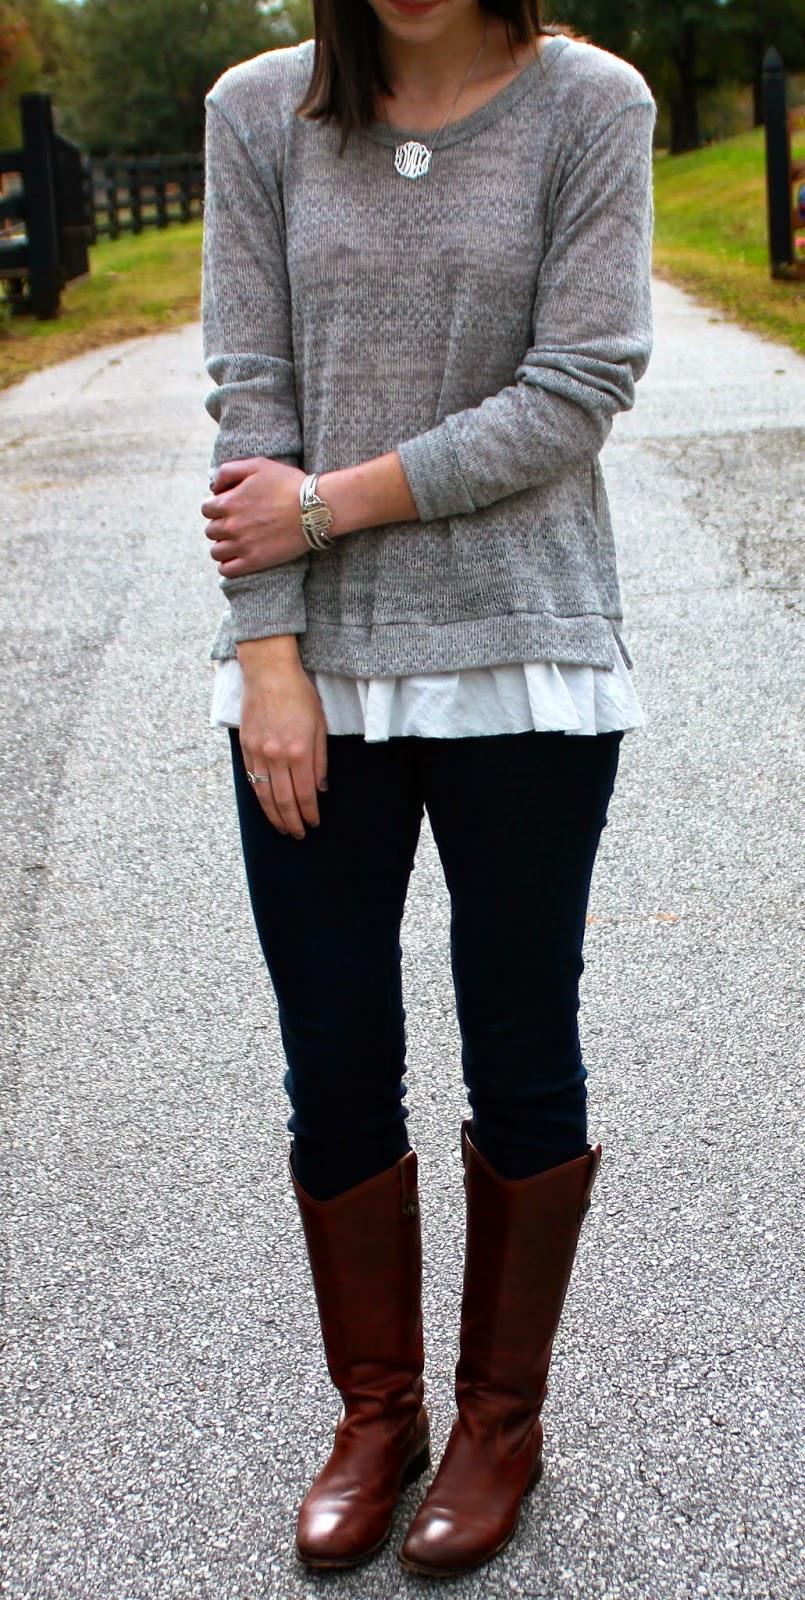 Prep In Your Step: Watch Your Back {Ruffles and Bows Sweater}